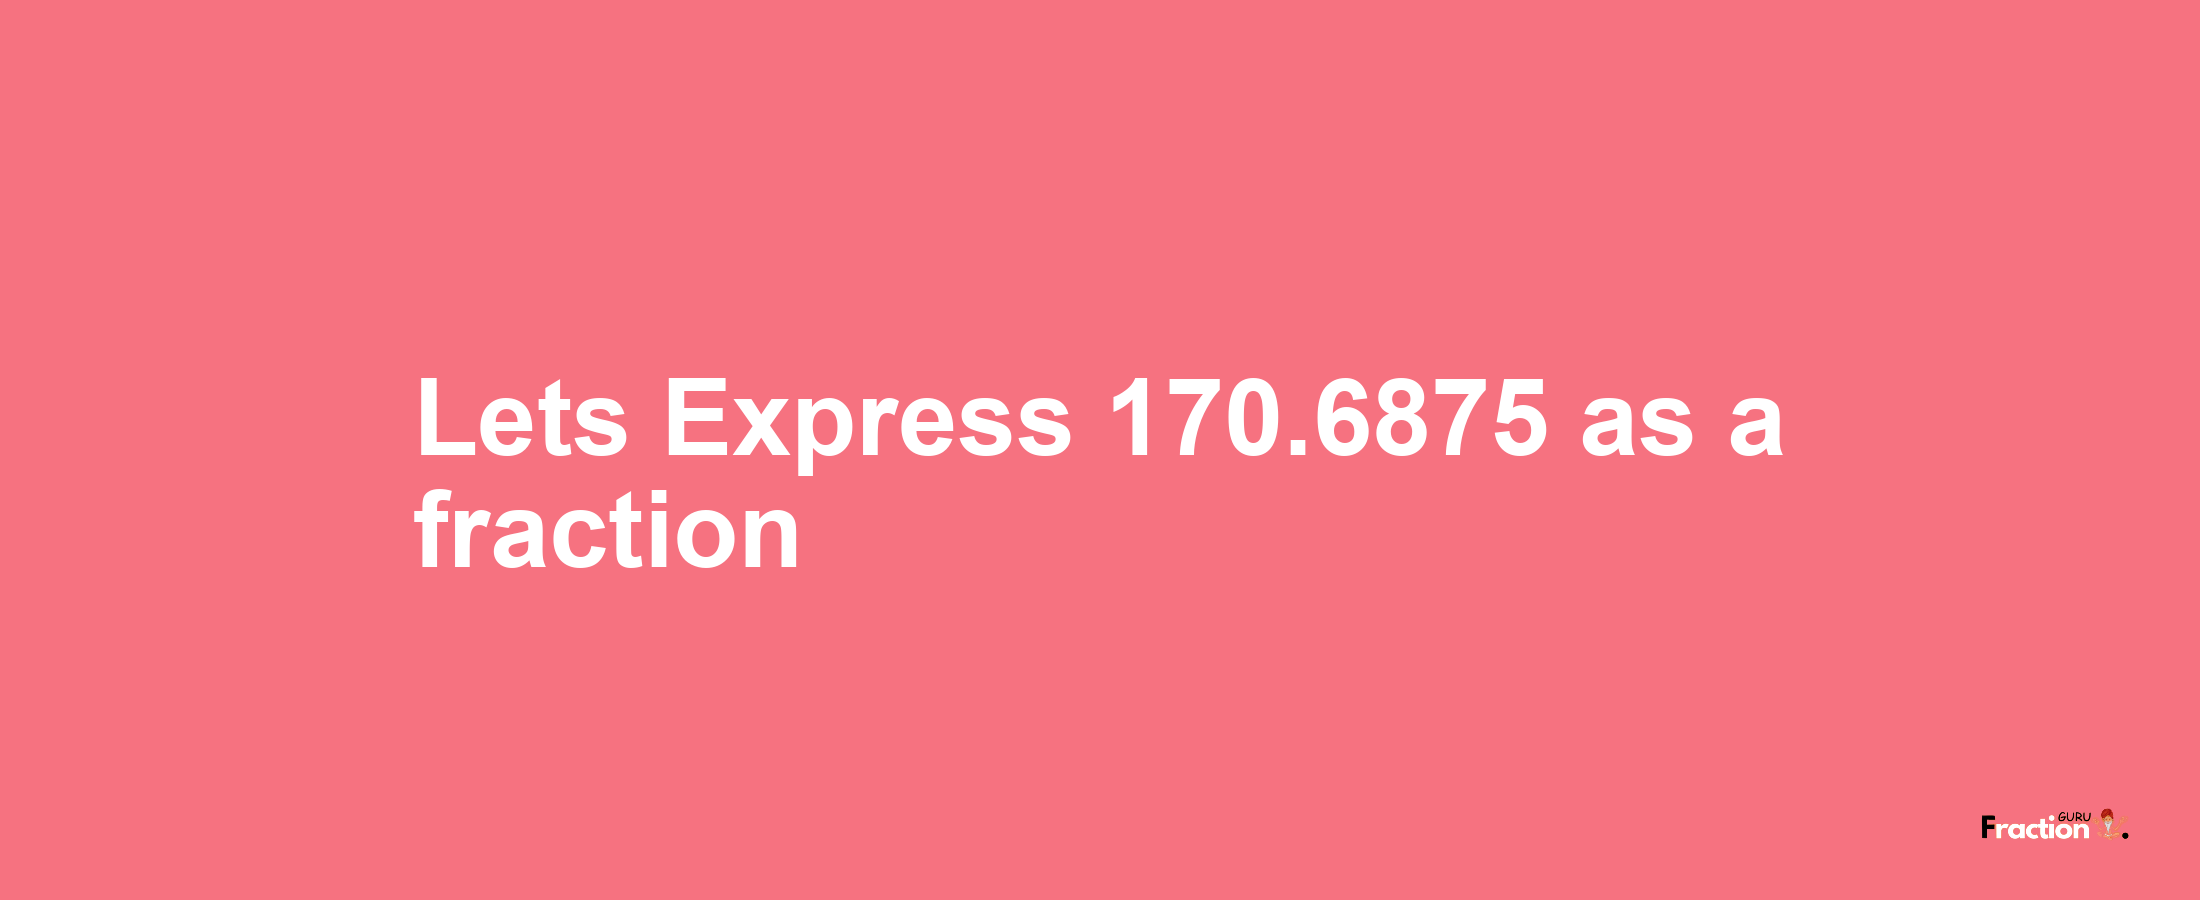 Lets Express 170.6875 as afraction